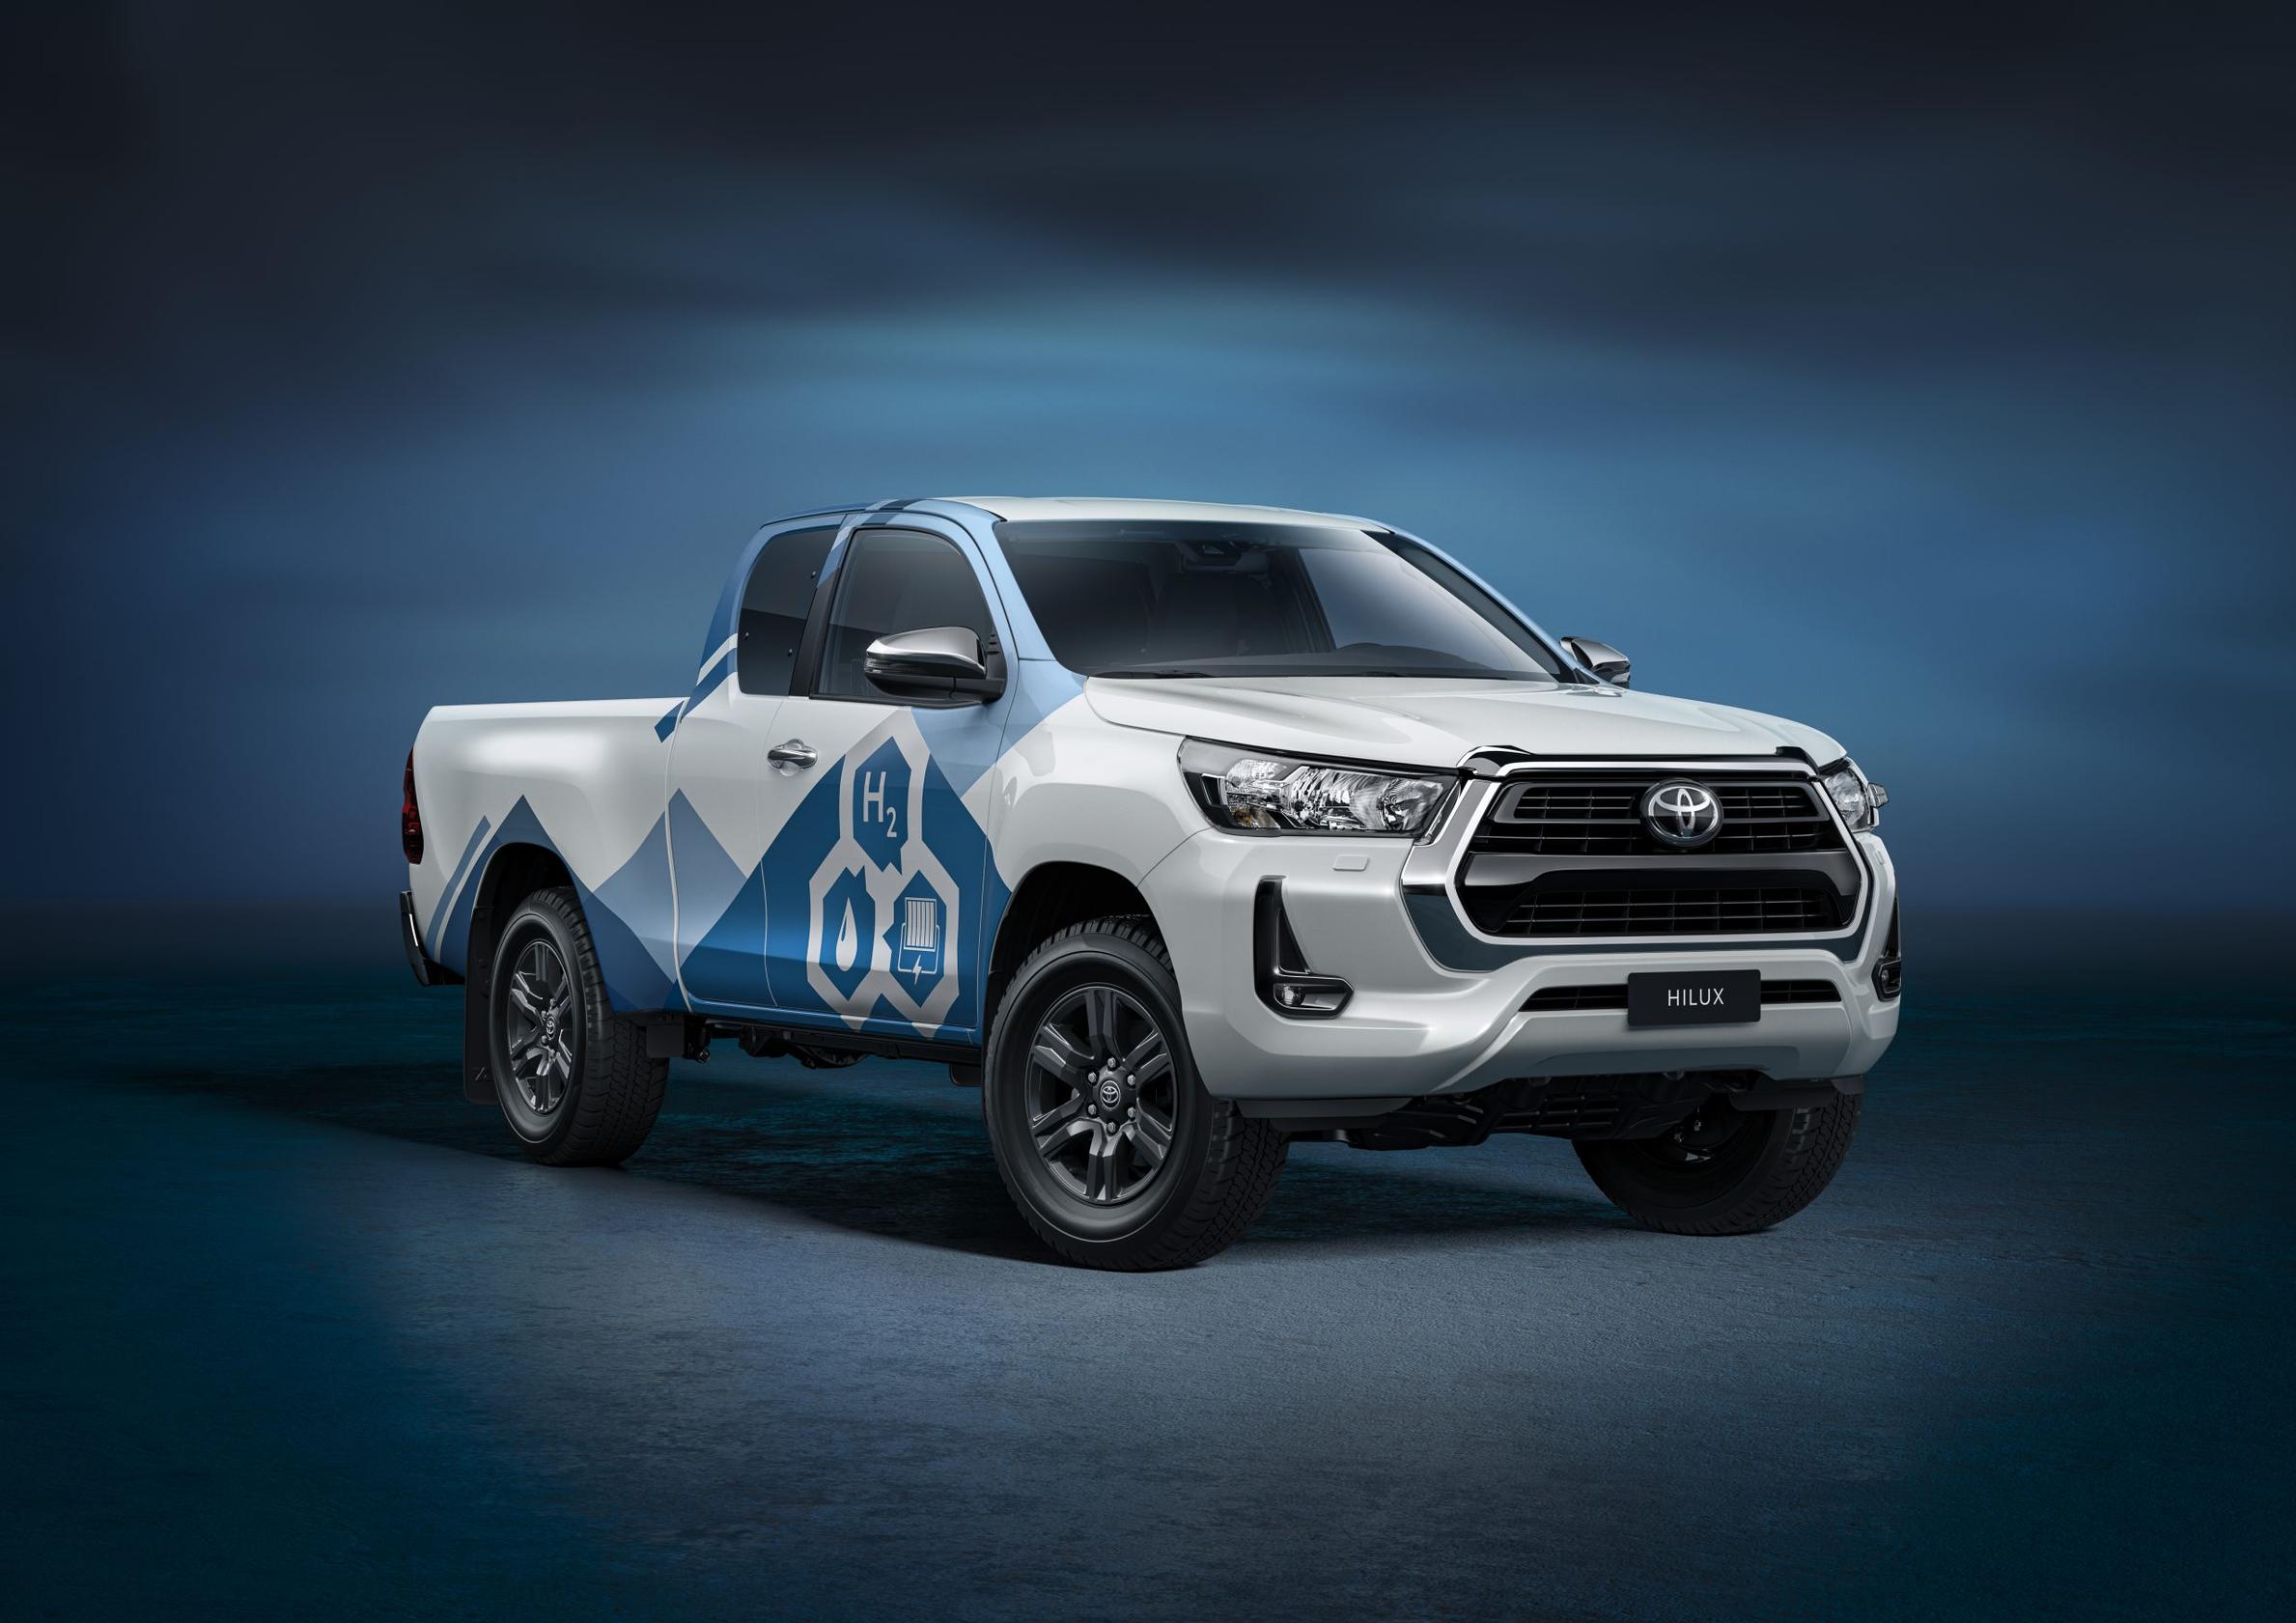 The hydrogen Hilux